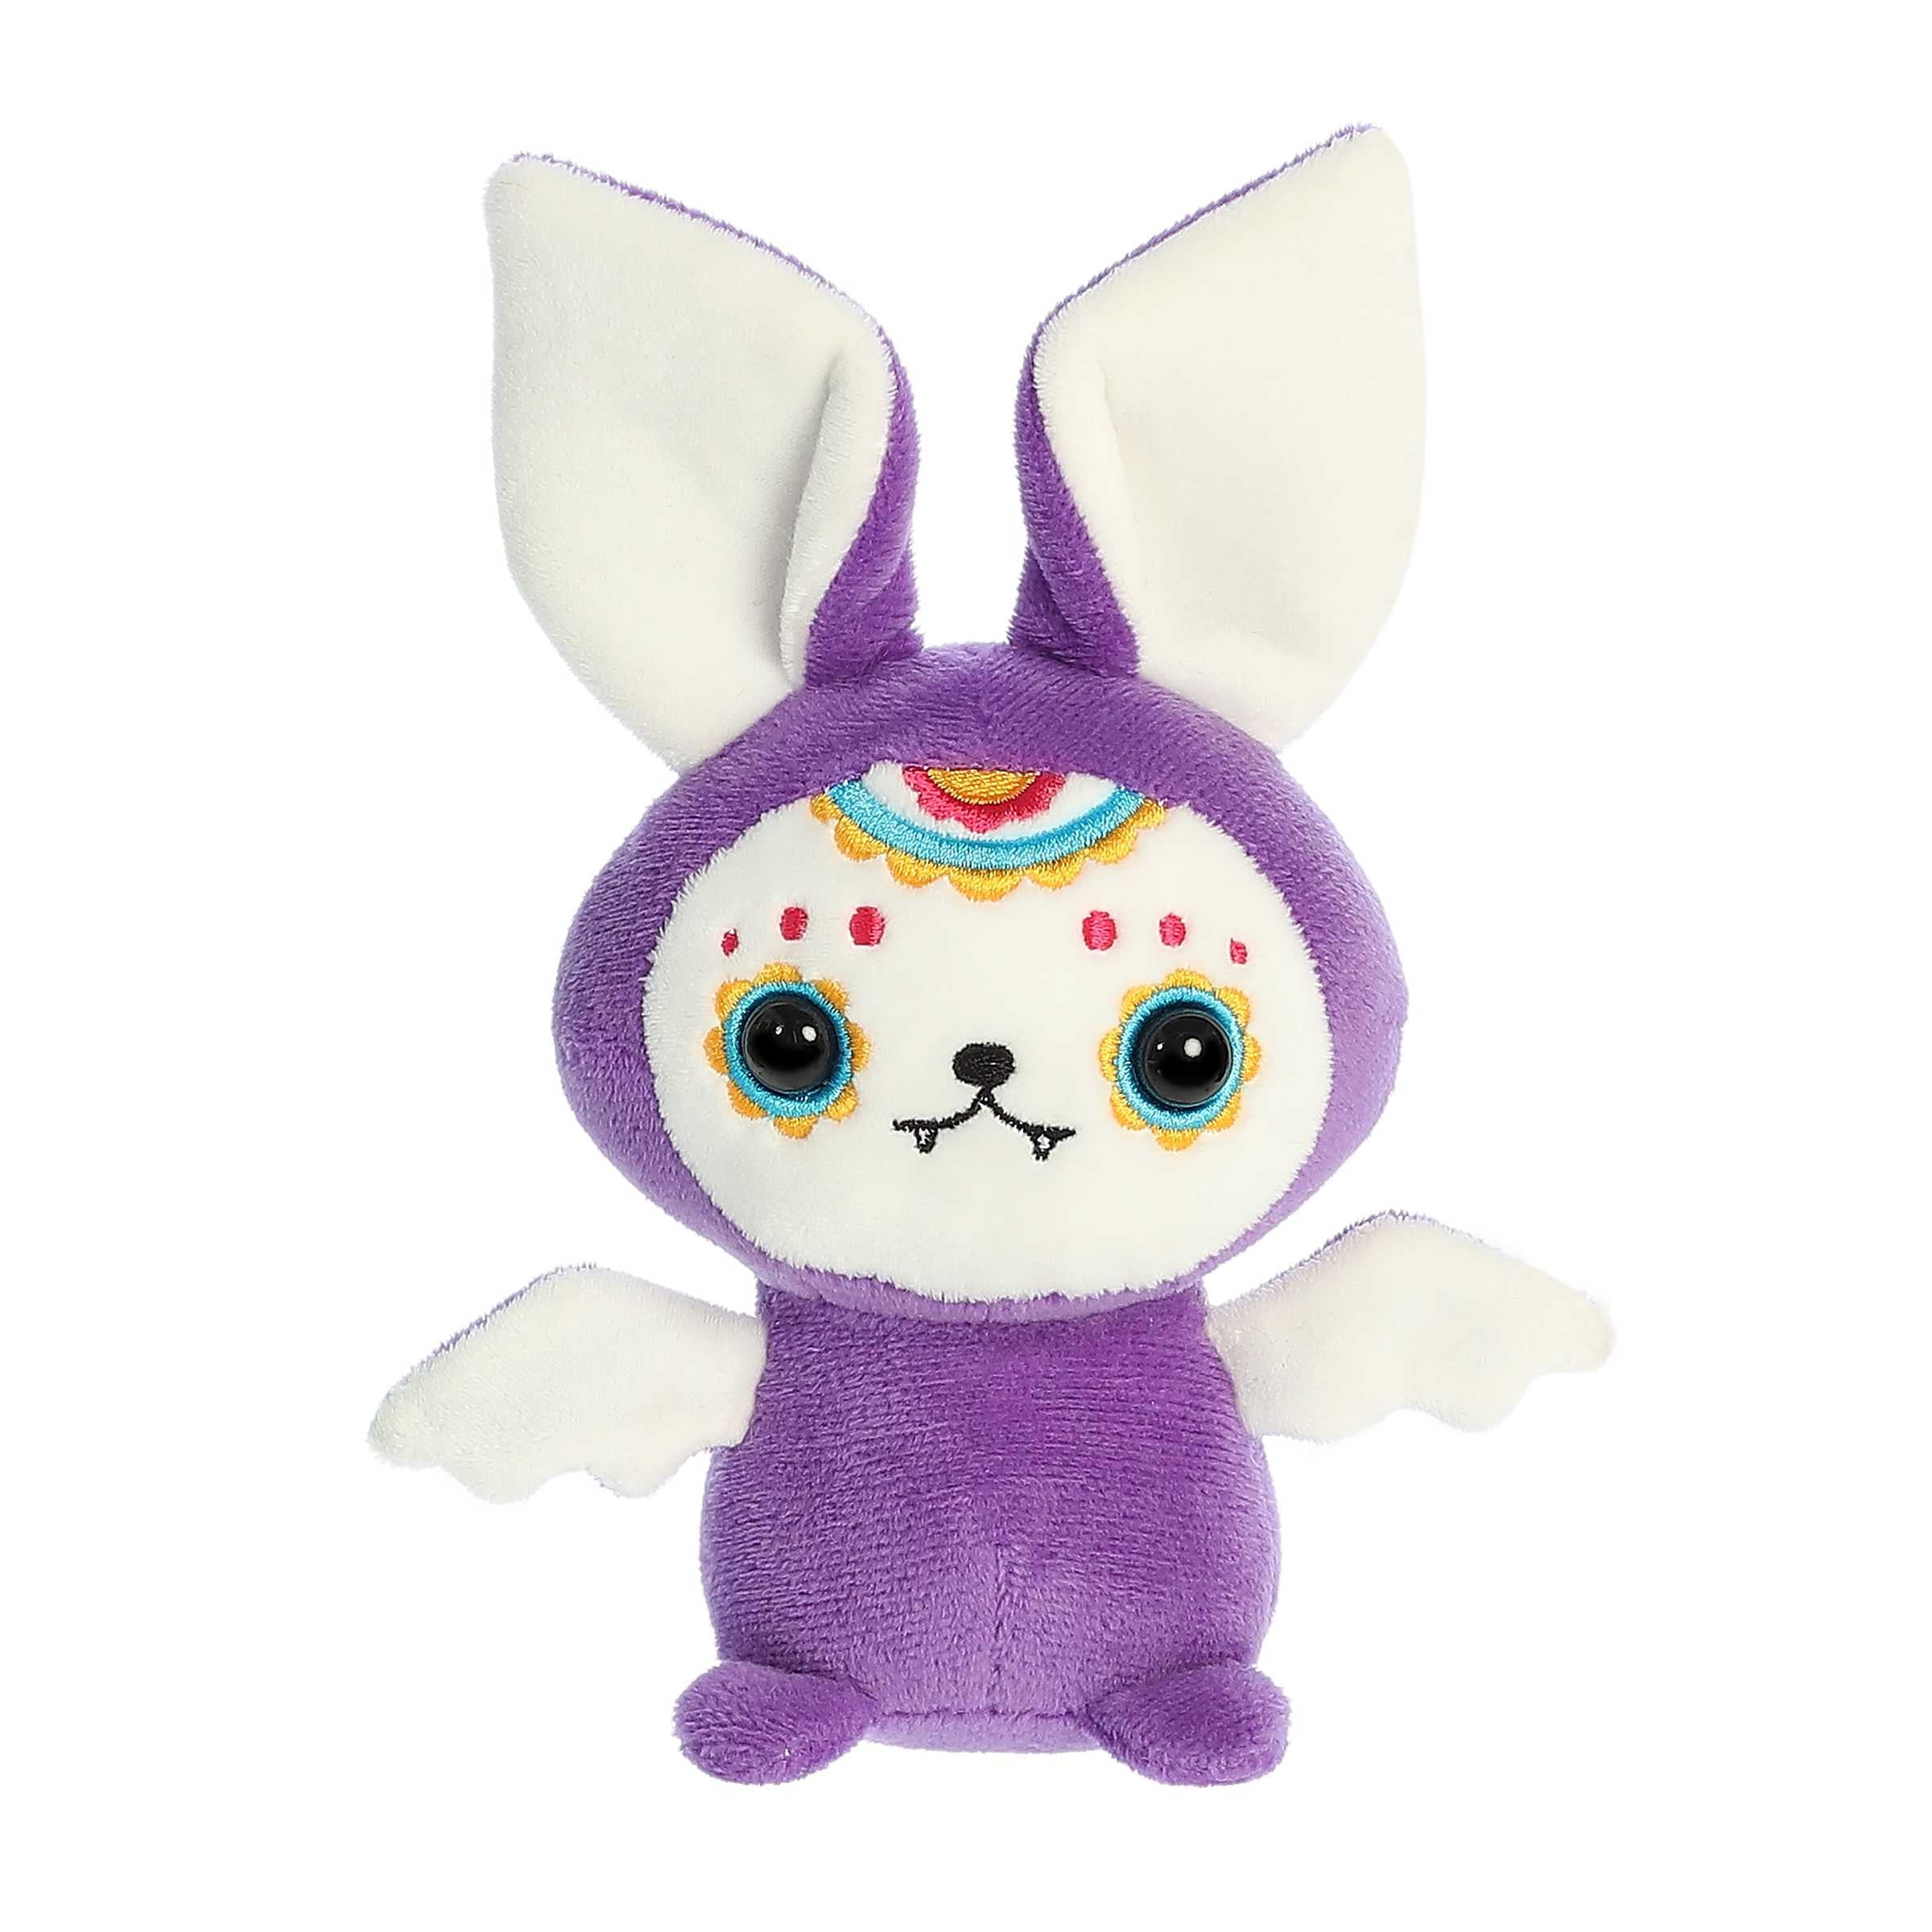 Purple bat stuffed animal with white ears and wings. Embroidered sugar skull painting details around the eyes and head.